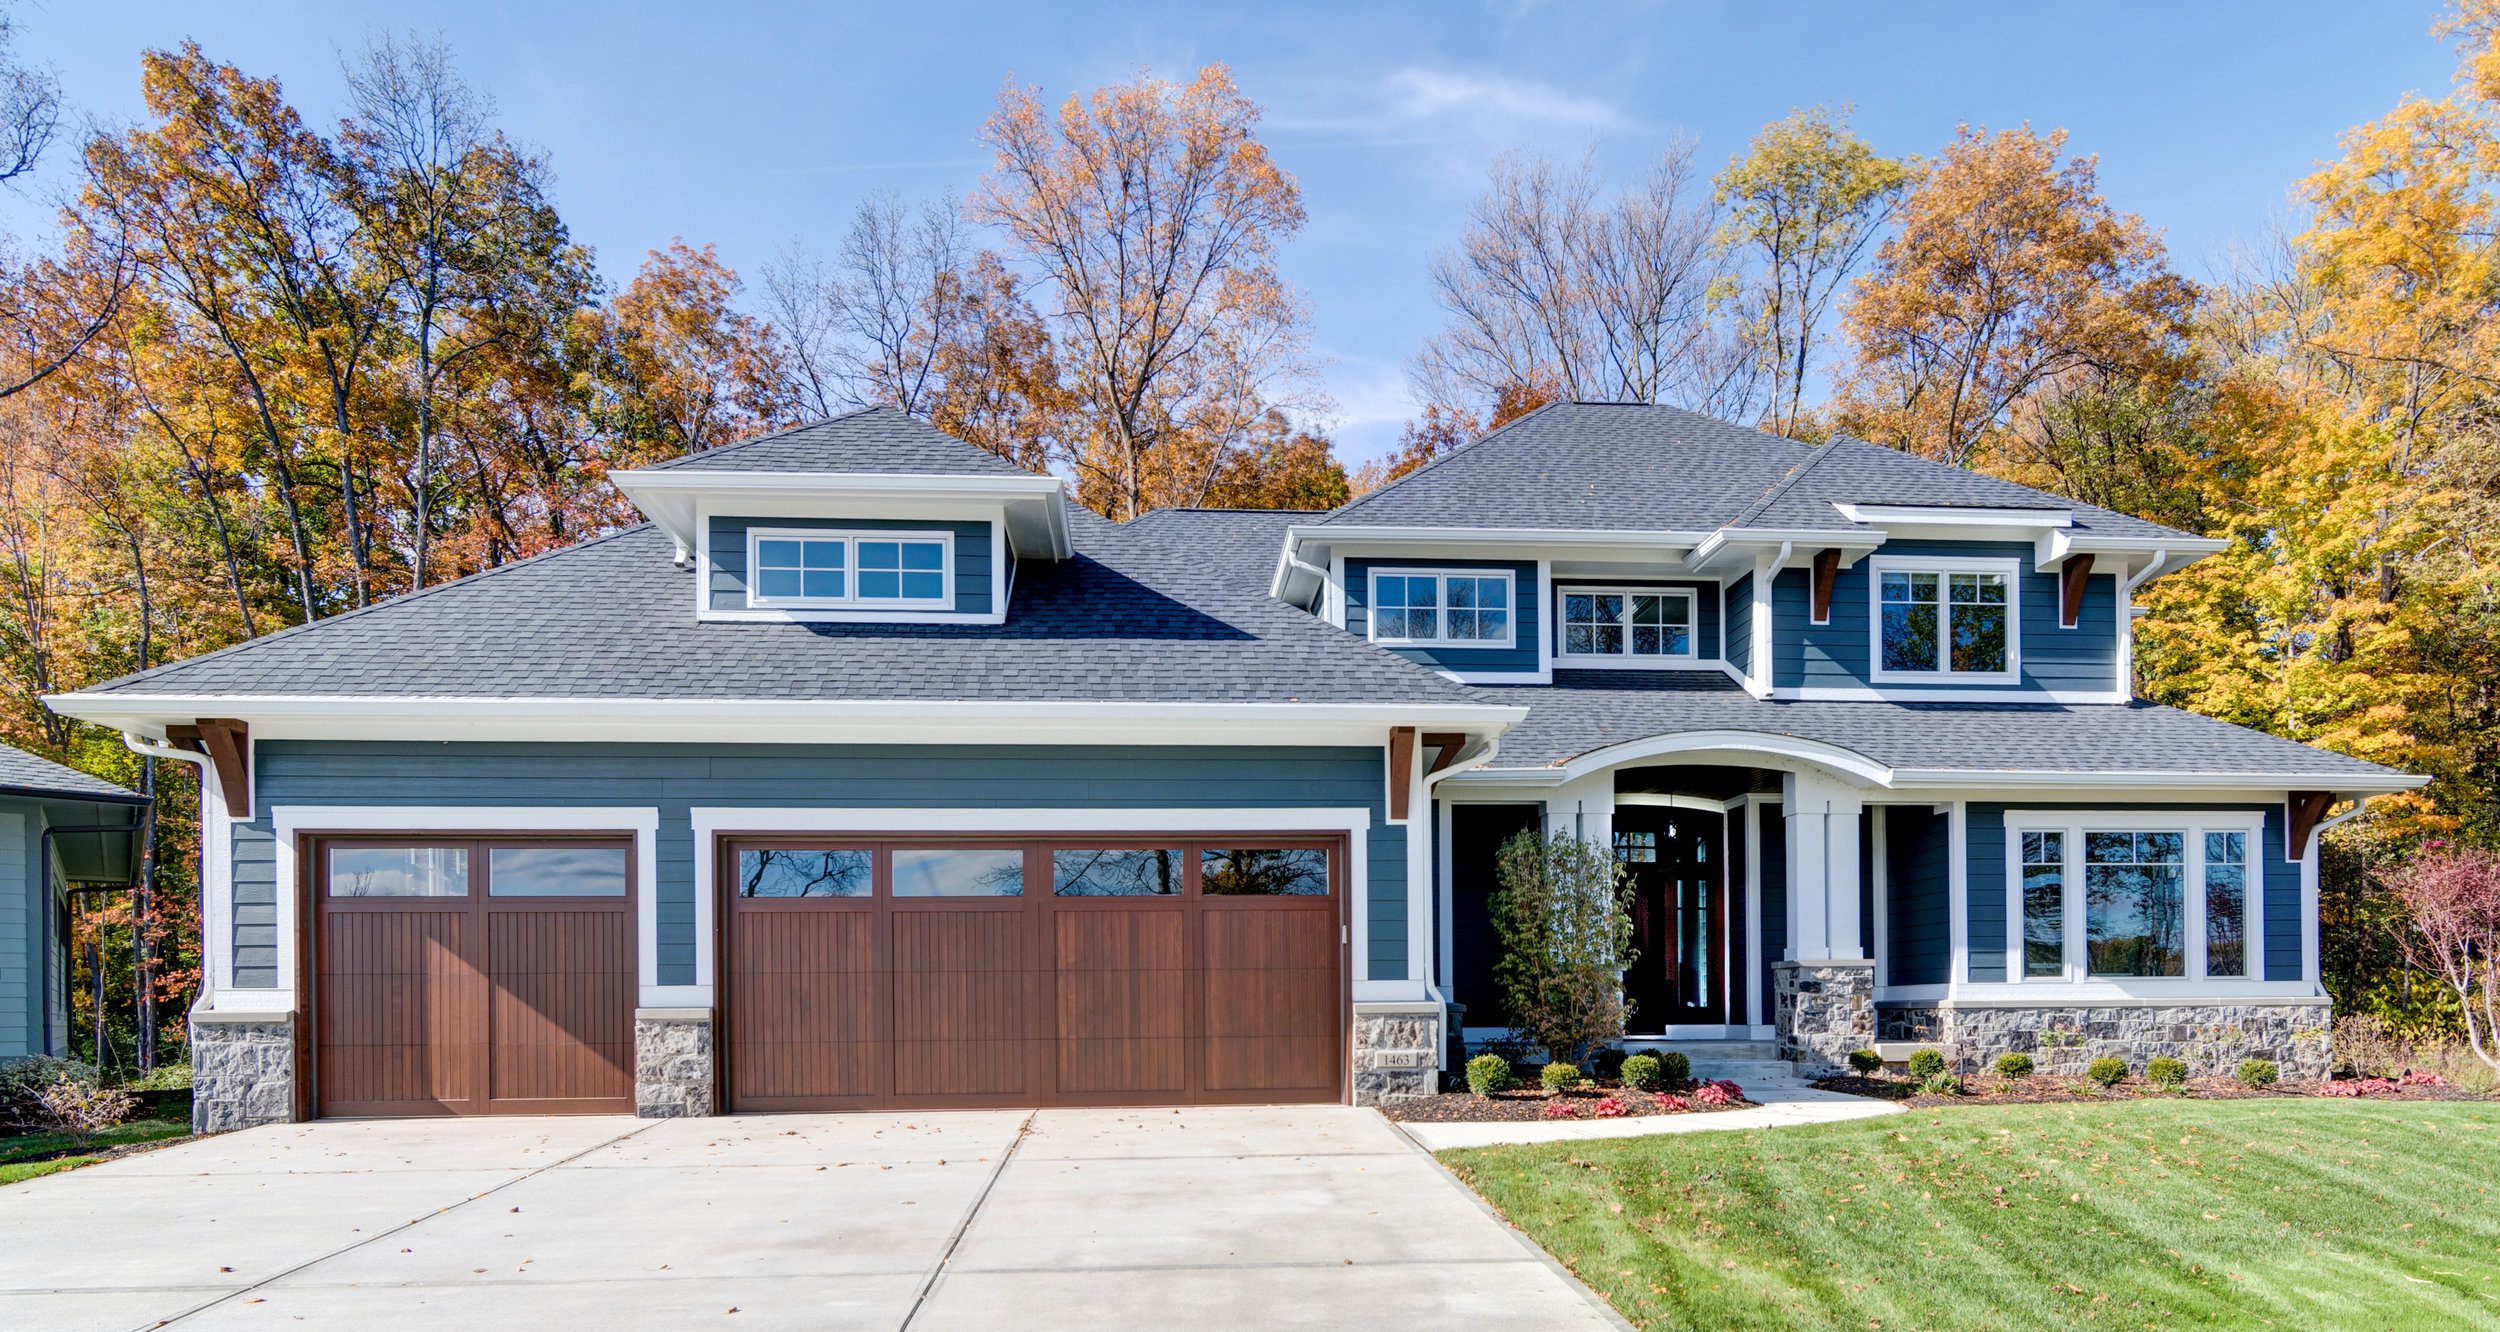 What Does It Mean To Custom Build A Home In Indianapolis?